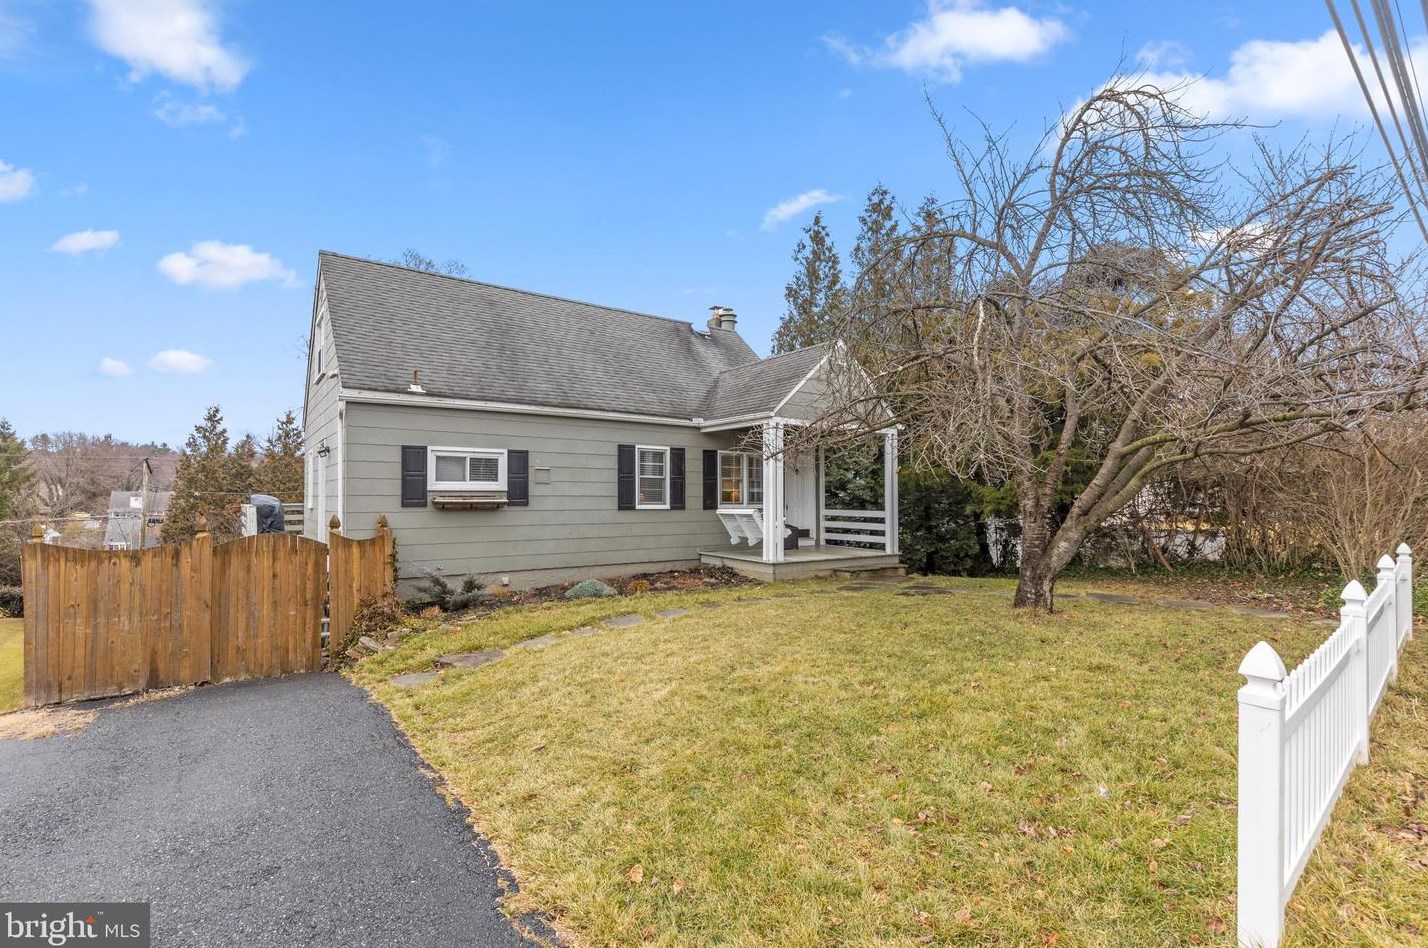 54 Cinder Rd, Lutherville Timonium, MD 21093